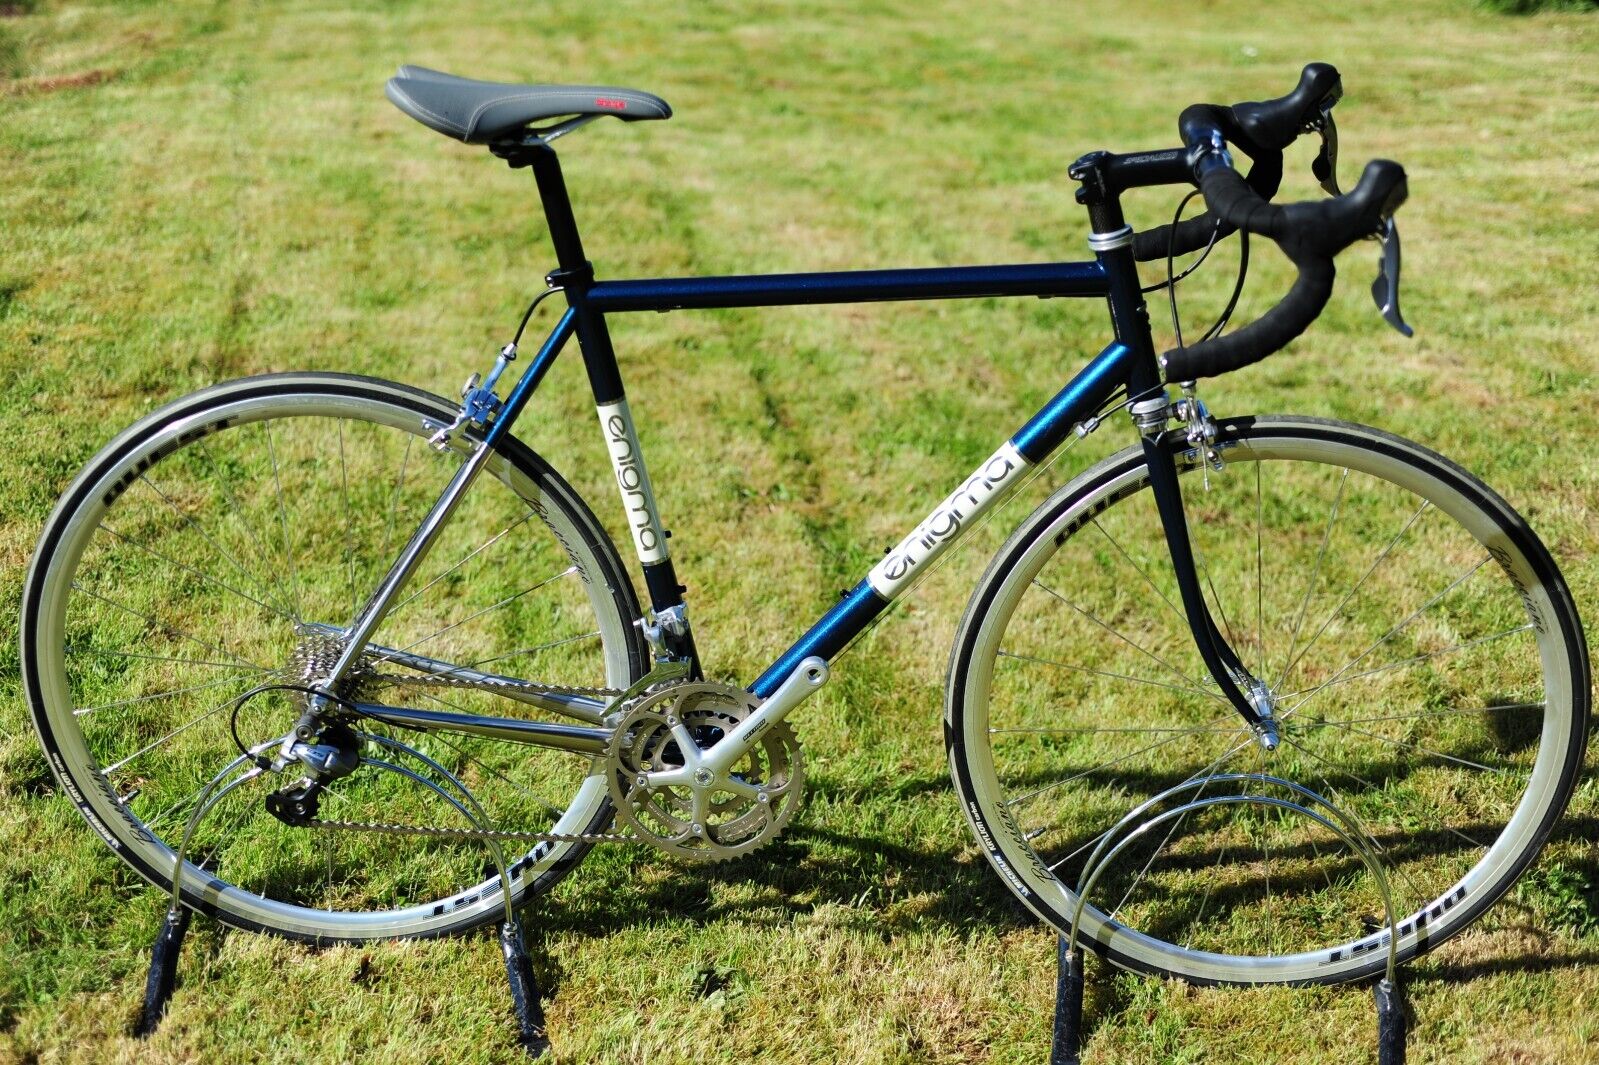 Enigma XCR 55cm race bike in stainless stee tubing. Unused, light storage marks.